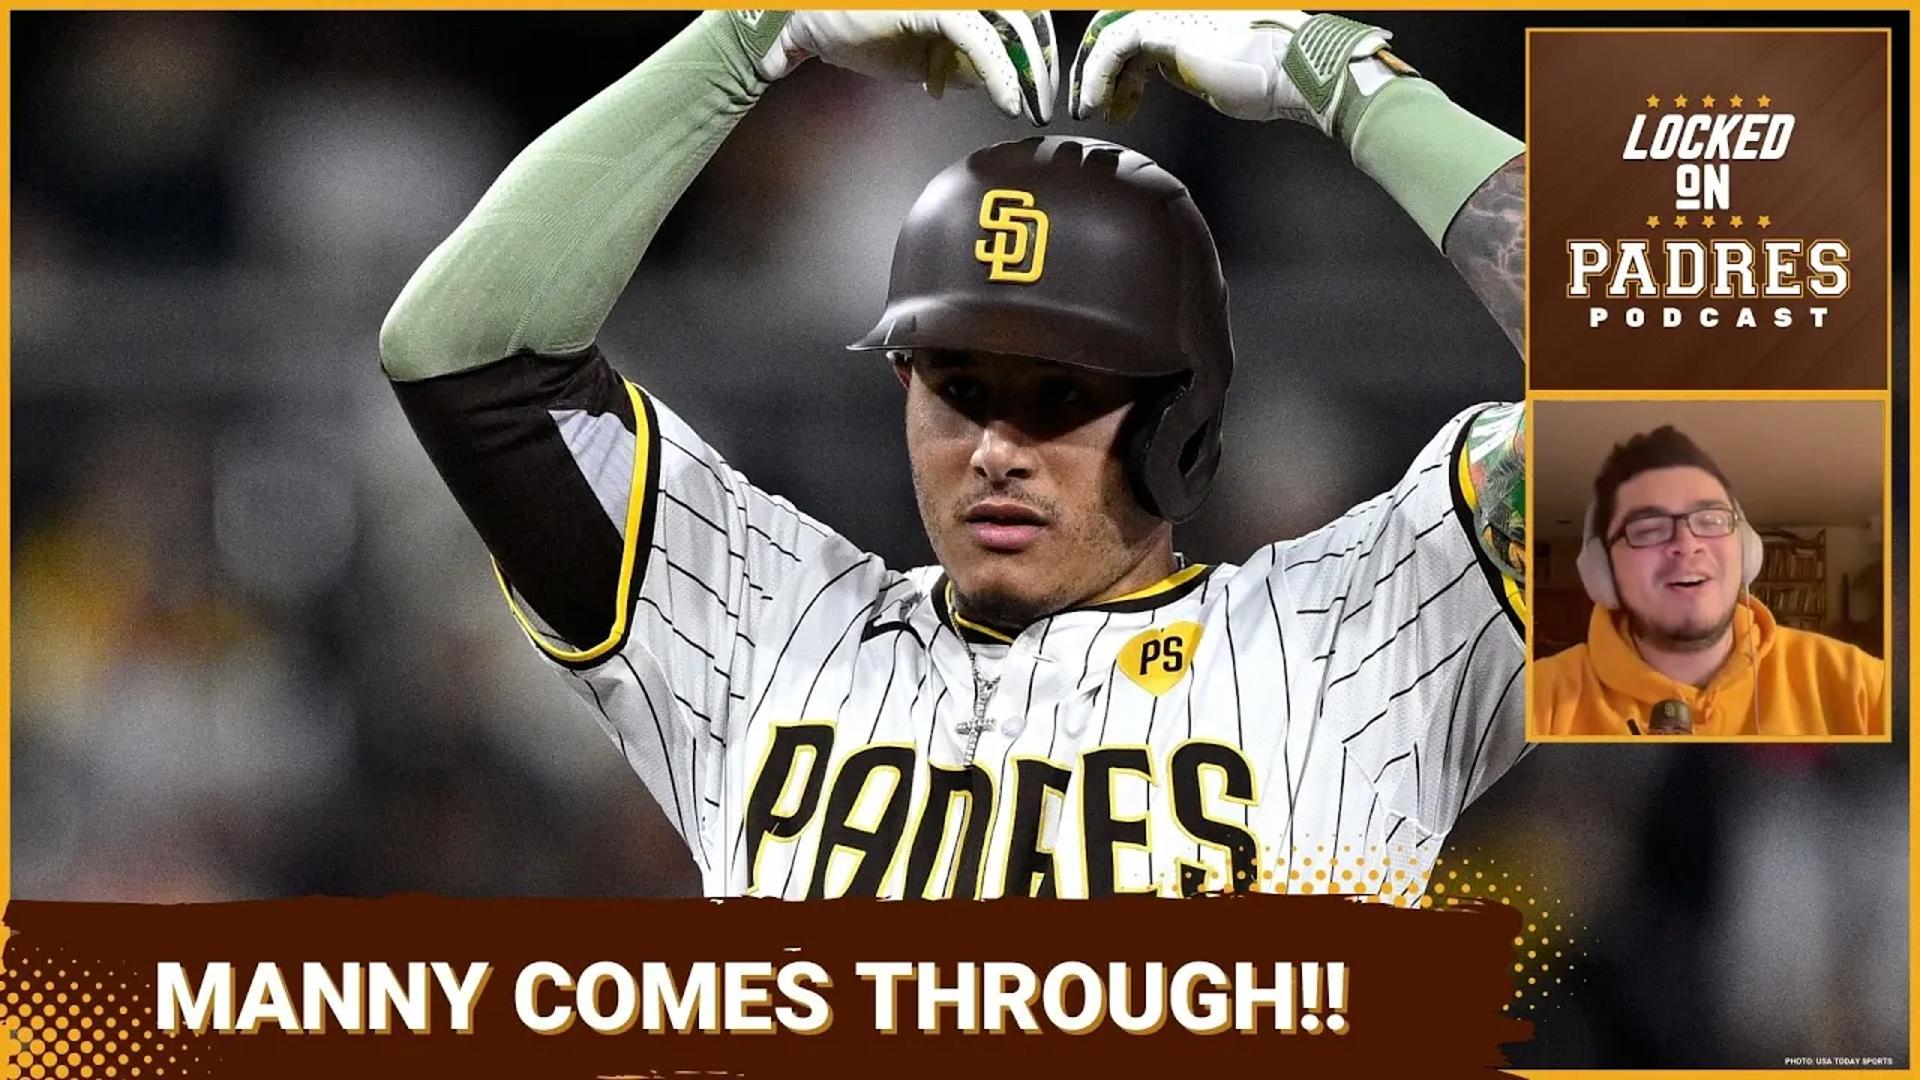 On today's episode, Javier recaps the Padres FINALLY getting a win over the Reds!